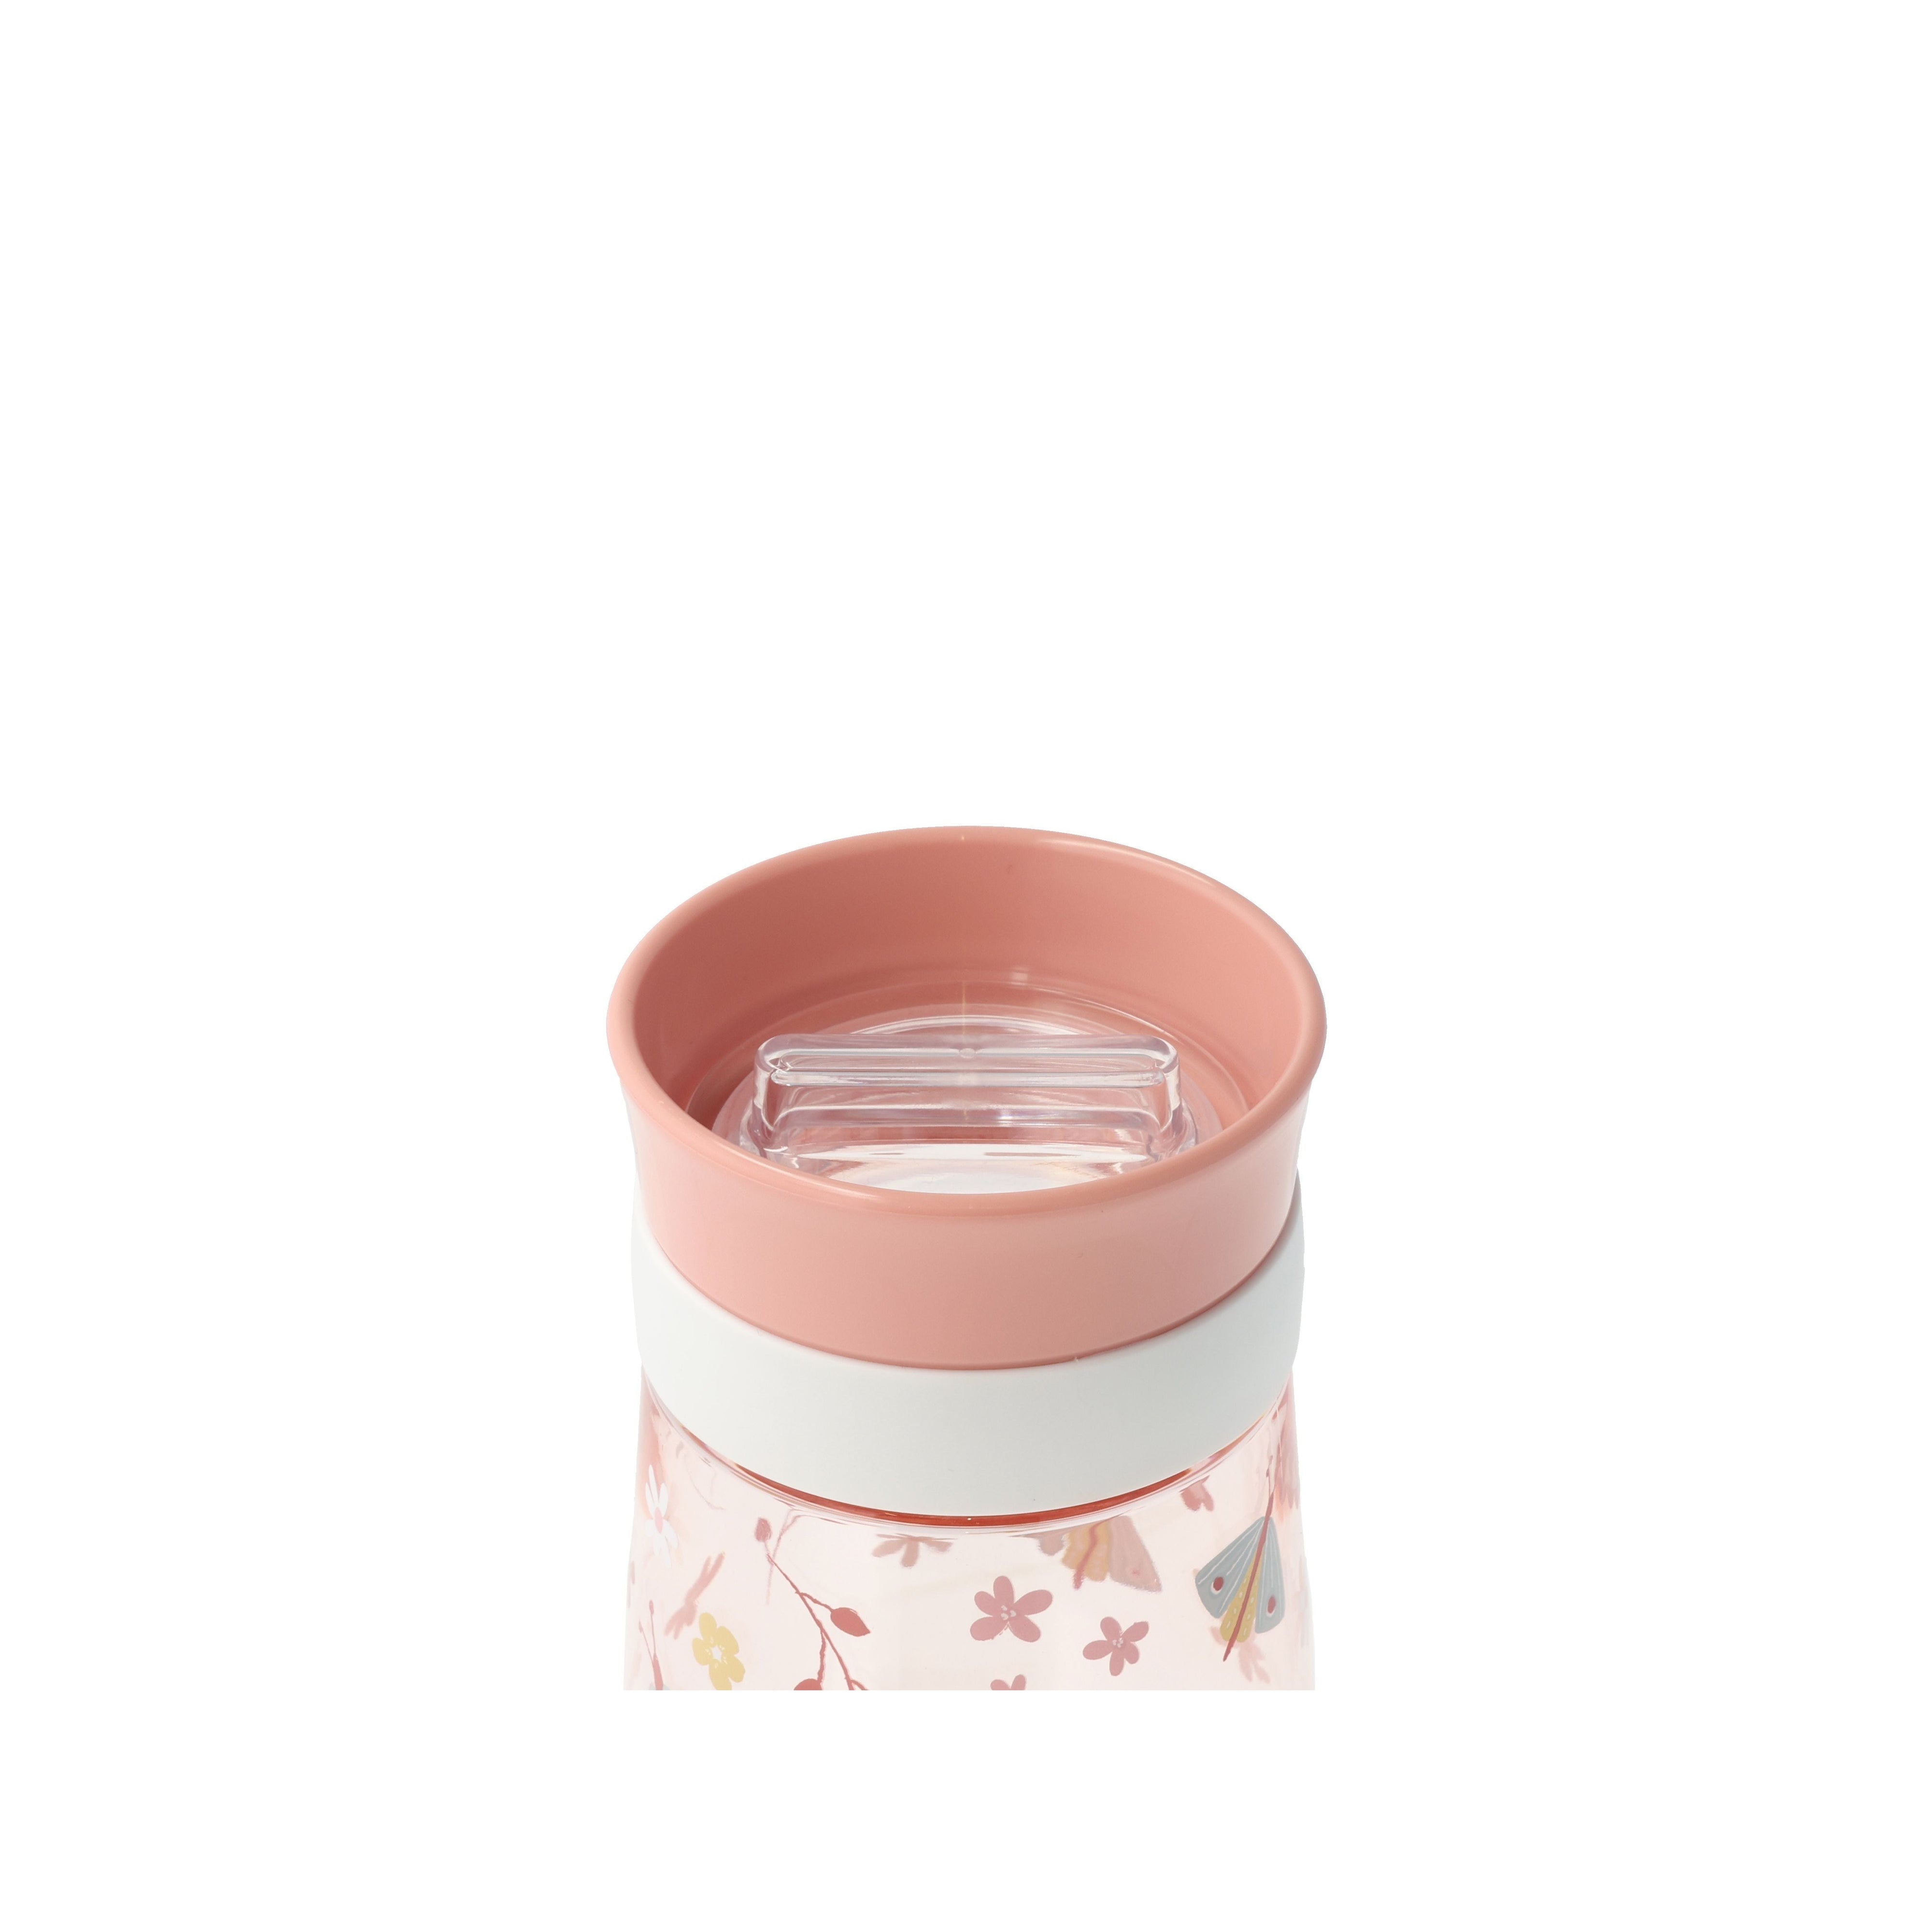 Mepal Mio Non Drip Baby Cup, květiny a motýly